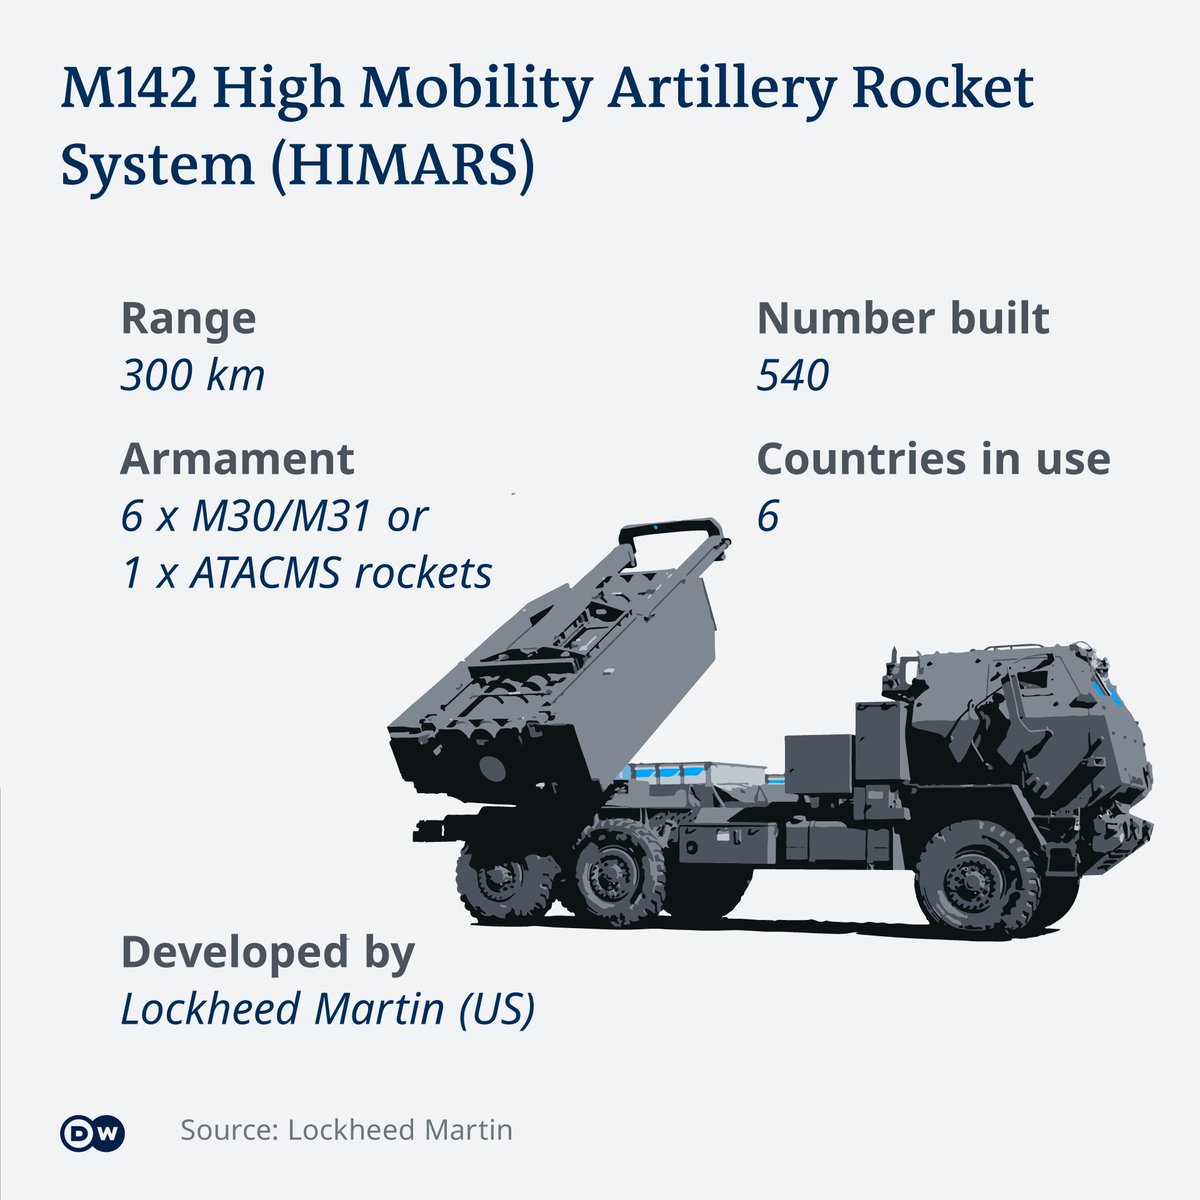 #HIMARS #RussiaUkraineWar️ #RussianArmy HIMARS is the M142 High Mobility Artillery Rocket System. The USMC says, per interestingengineering.com/science/watch-…, accuracy is 1 m 3.3’ at 300 km / 186 miles. In comparison, Russia's... 1/